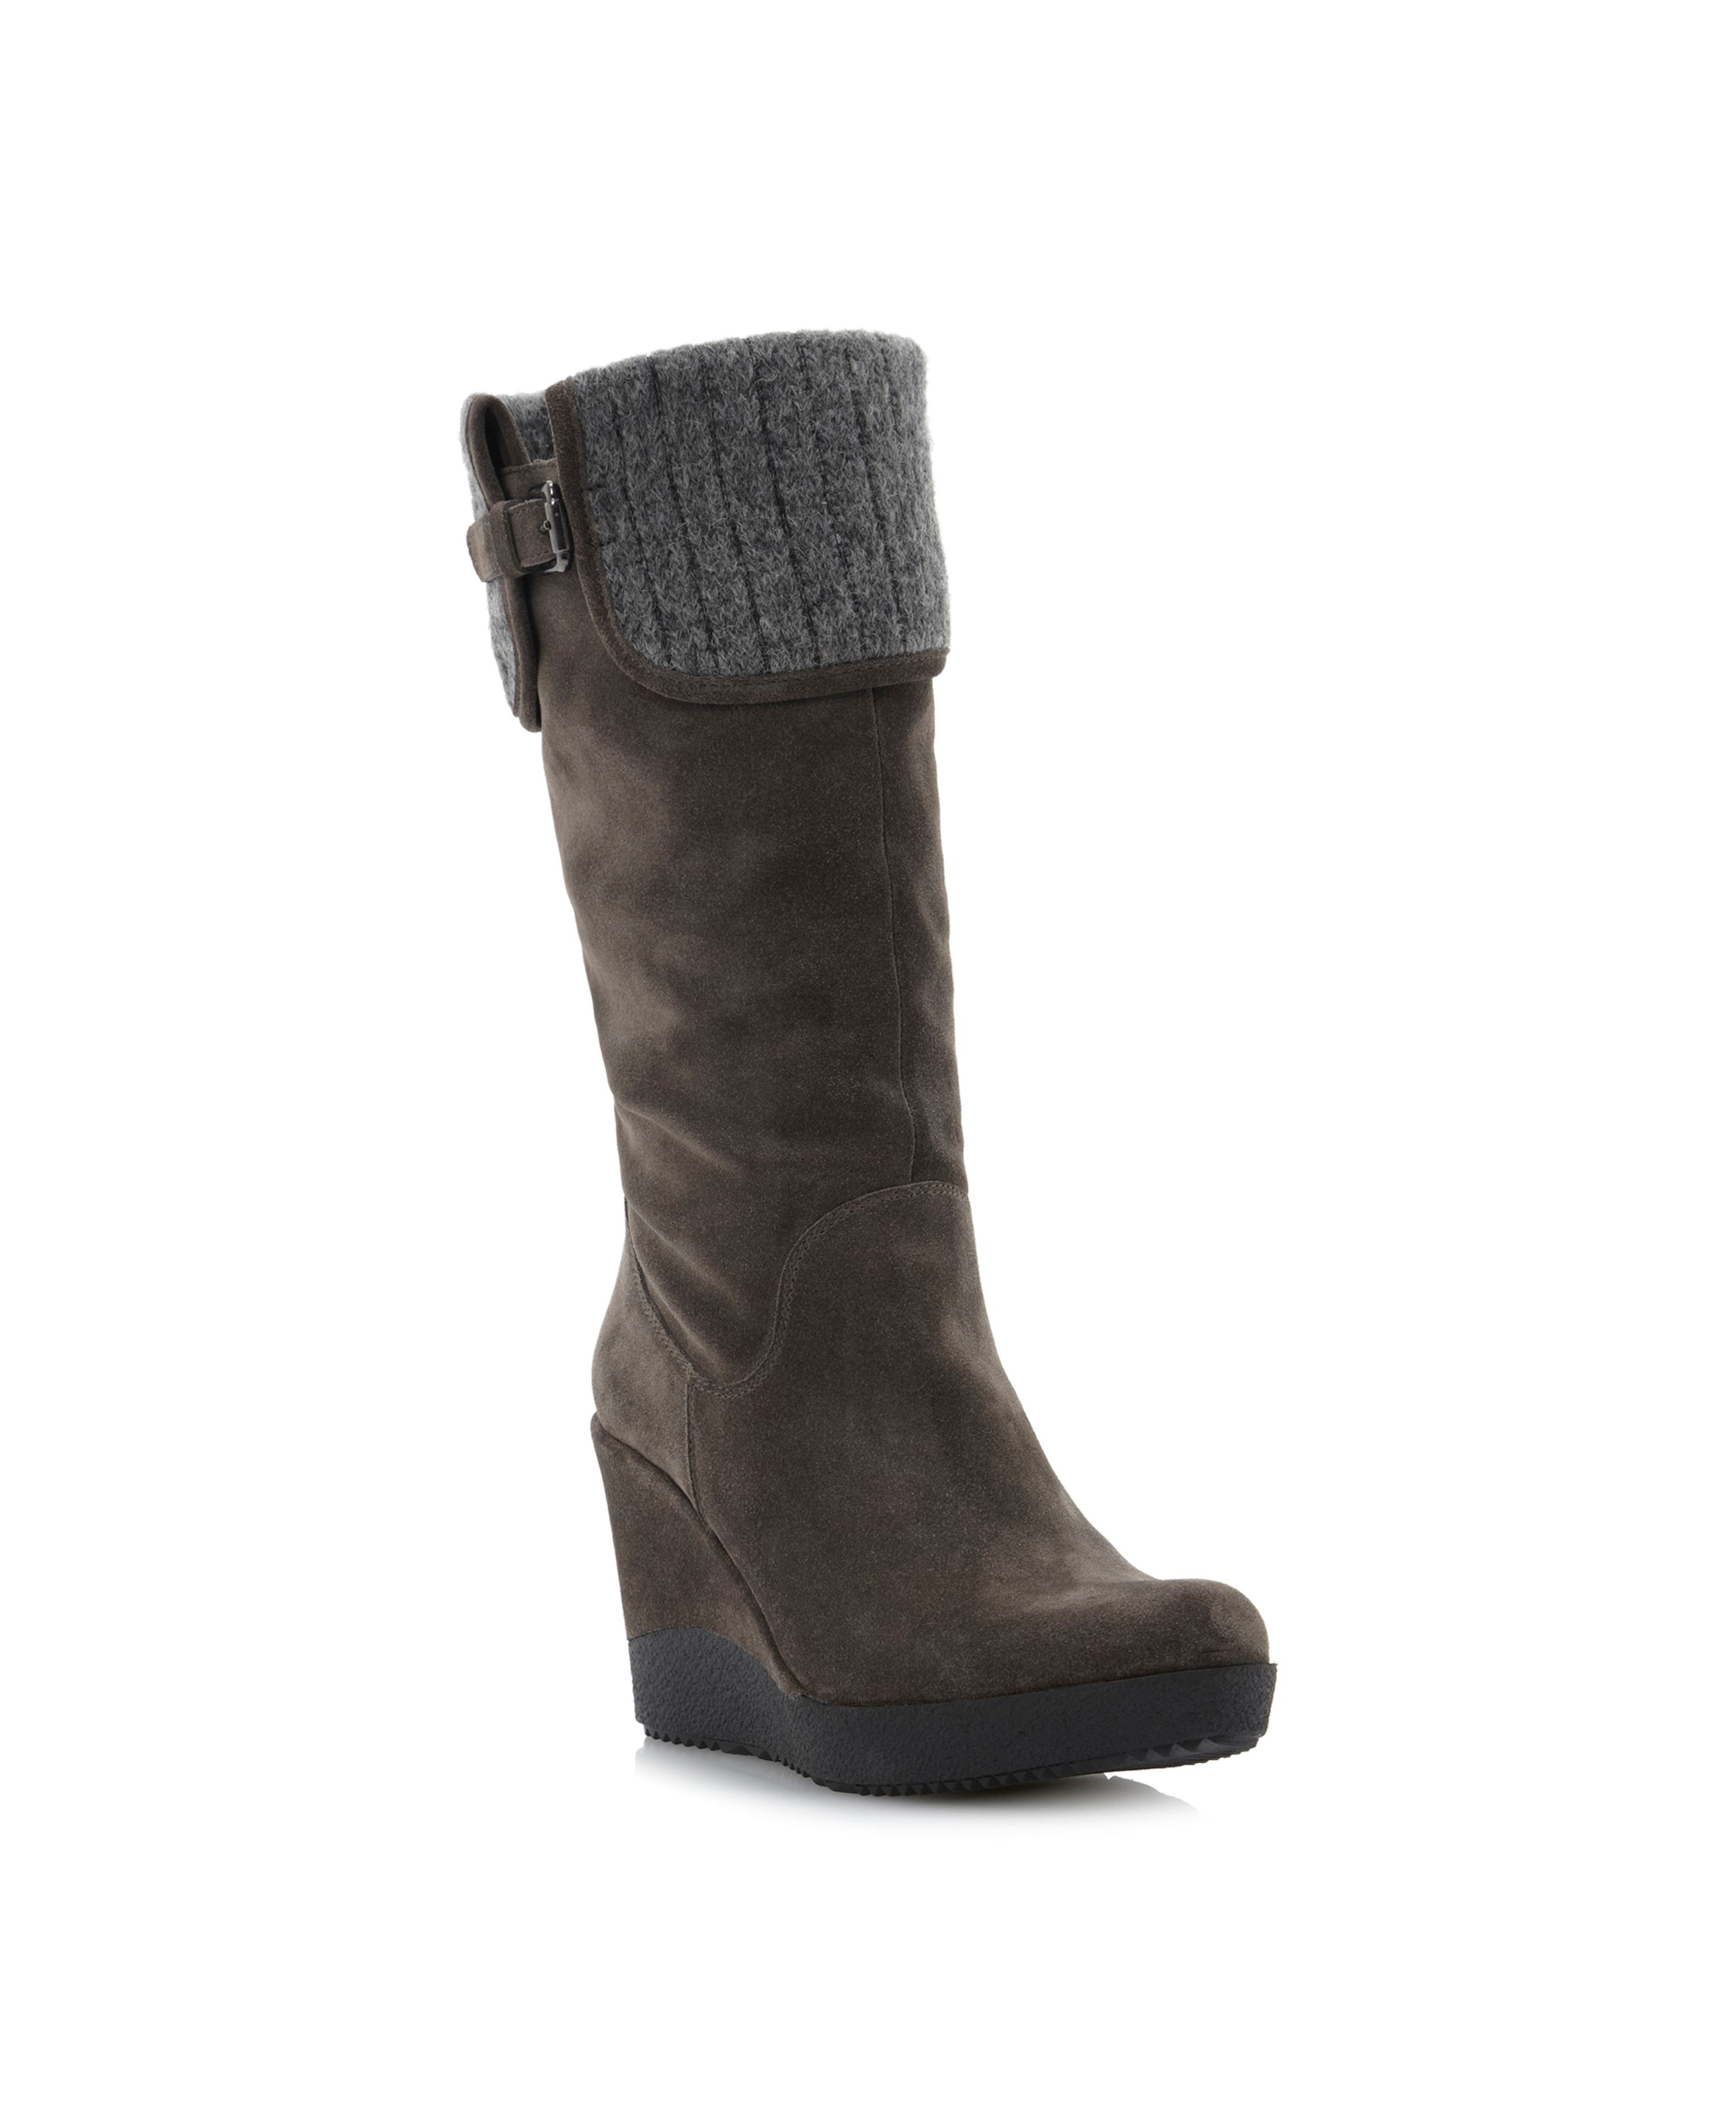 Dune Romas Fold Over Fabric Cuff Boots in Gray (Grey) | Lyst